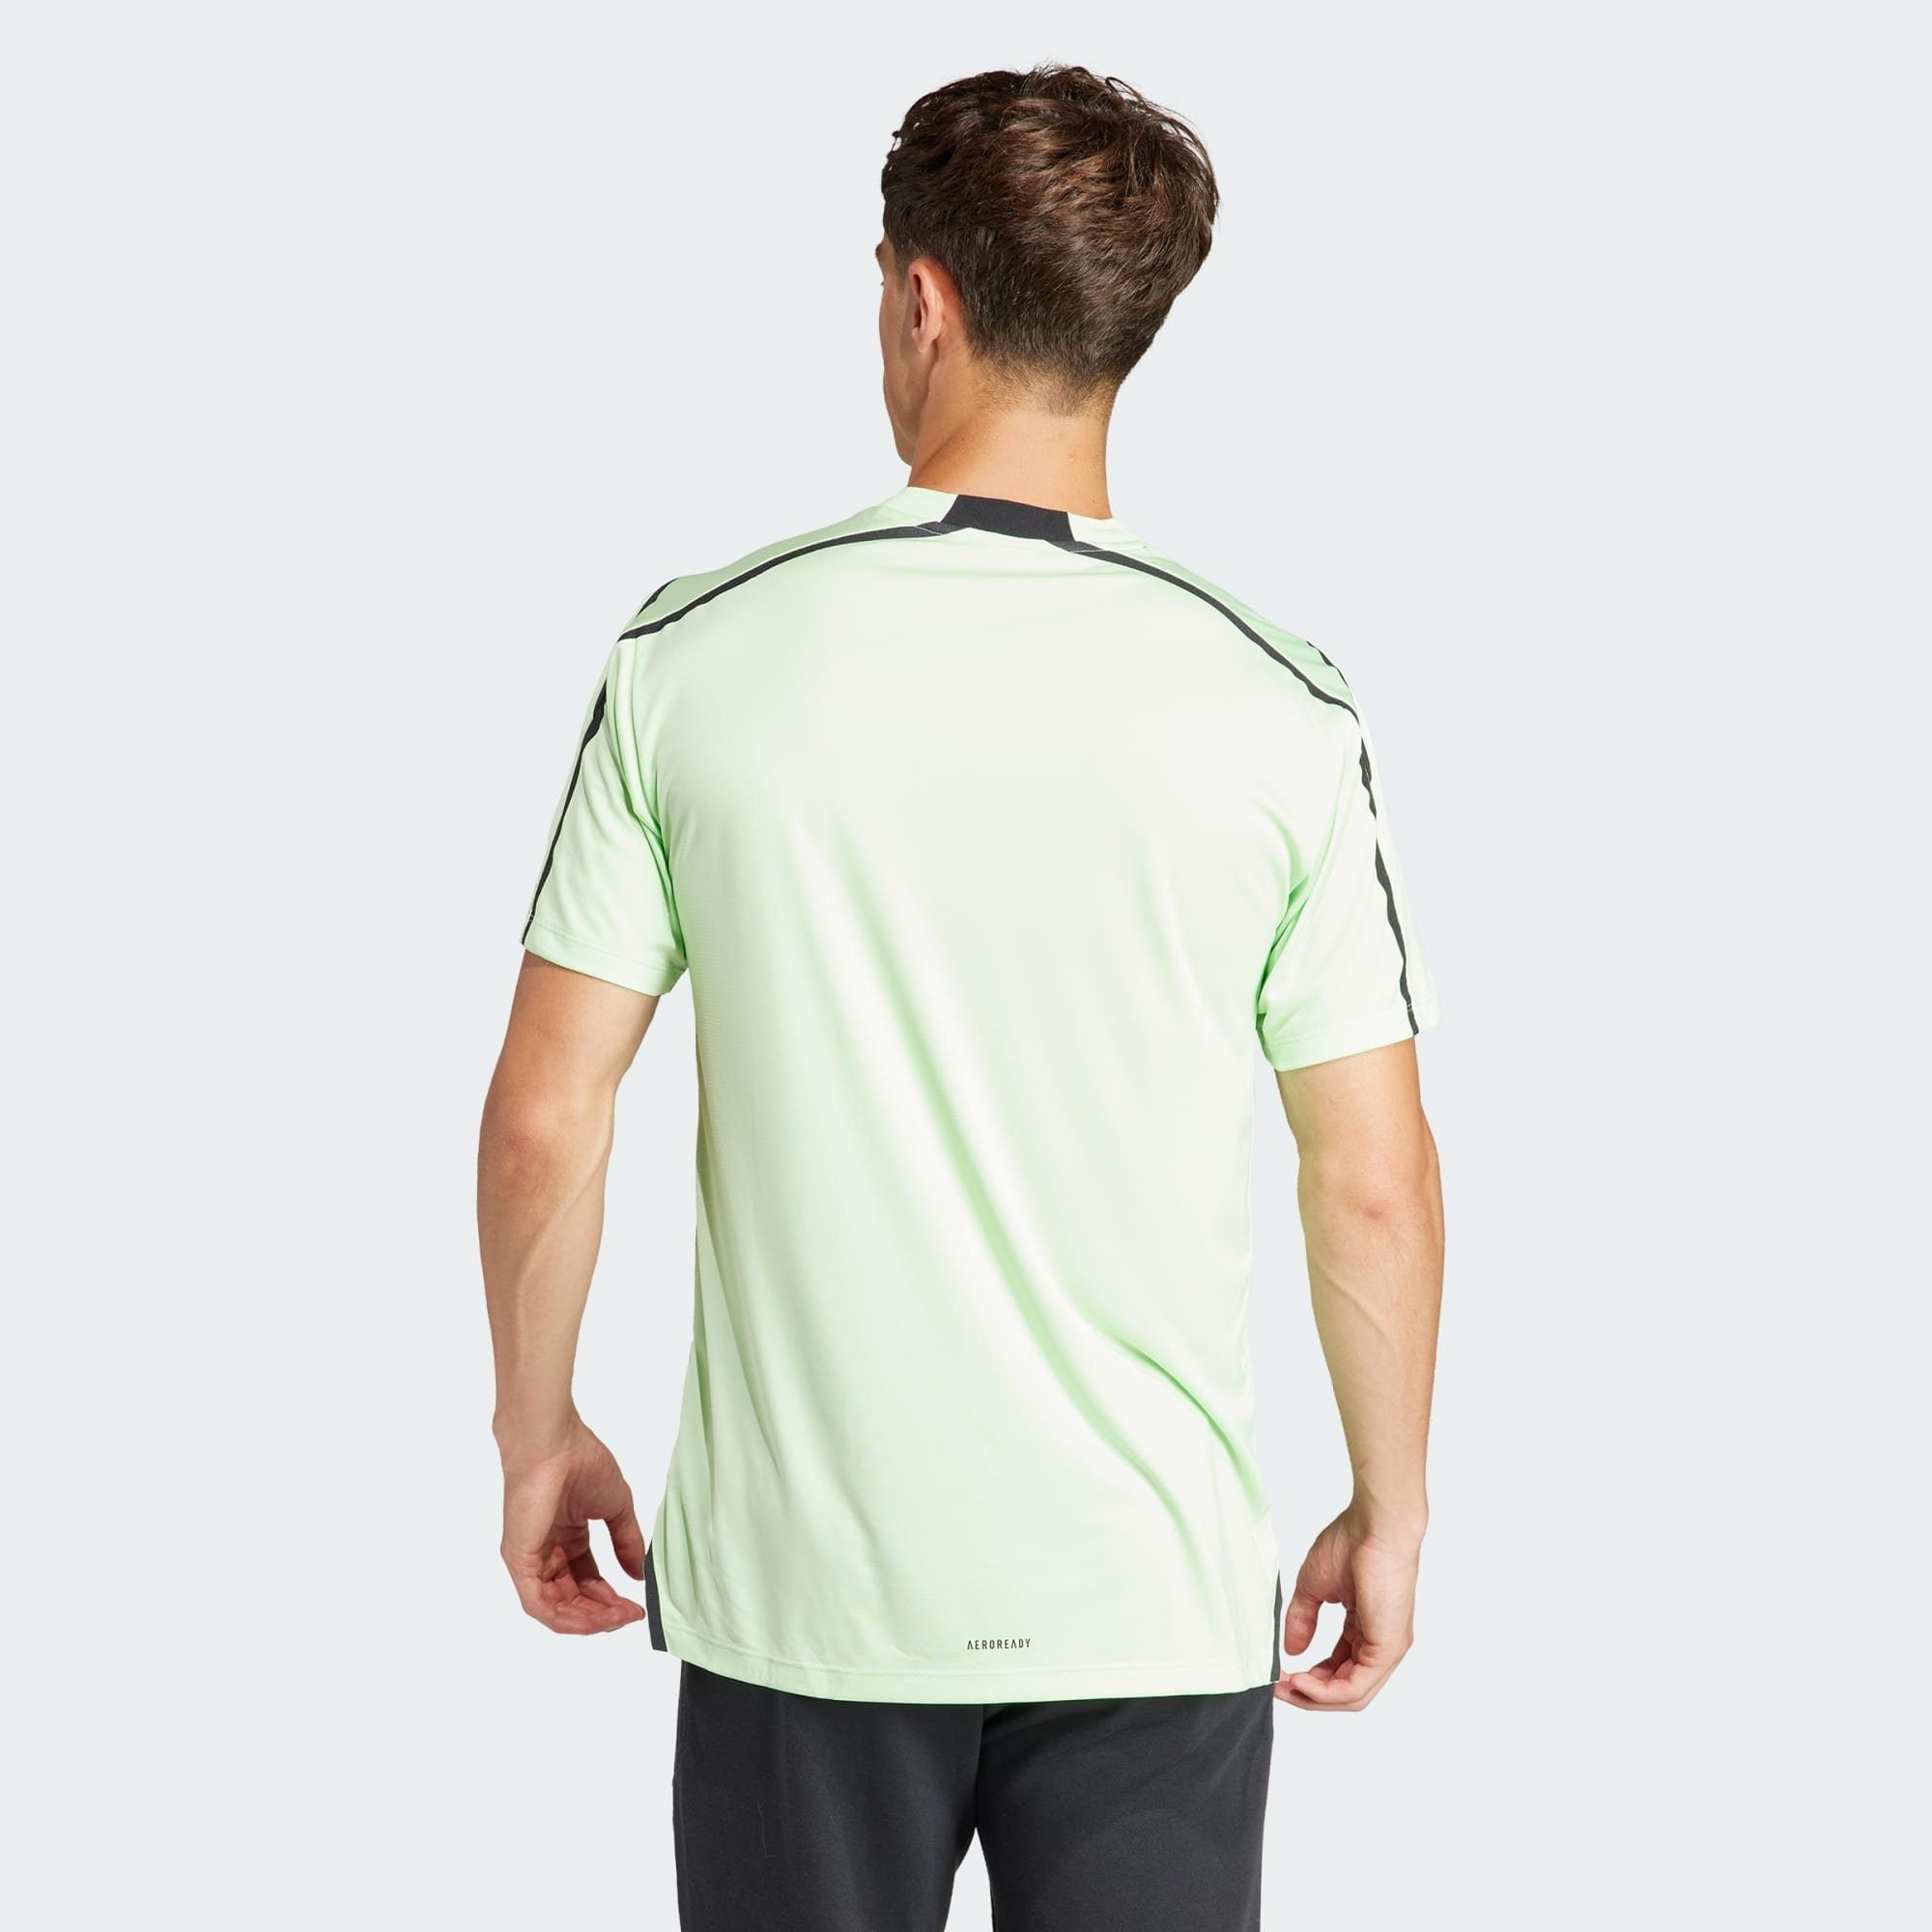 DESIGNED WORKOUT FOR / T-SHIRT Semi Black Funktionsshirt TRAINING Spark Performance adidas ADISTRONG Green